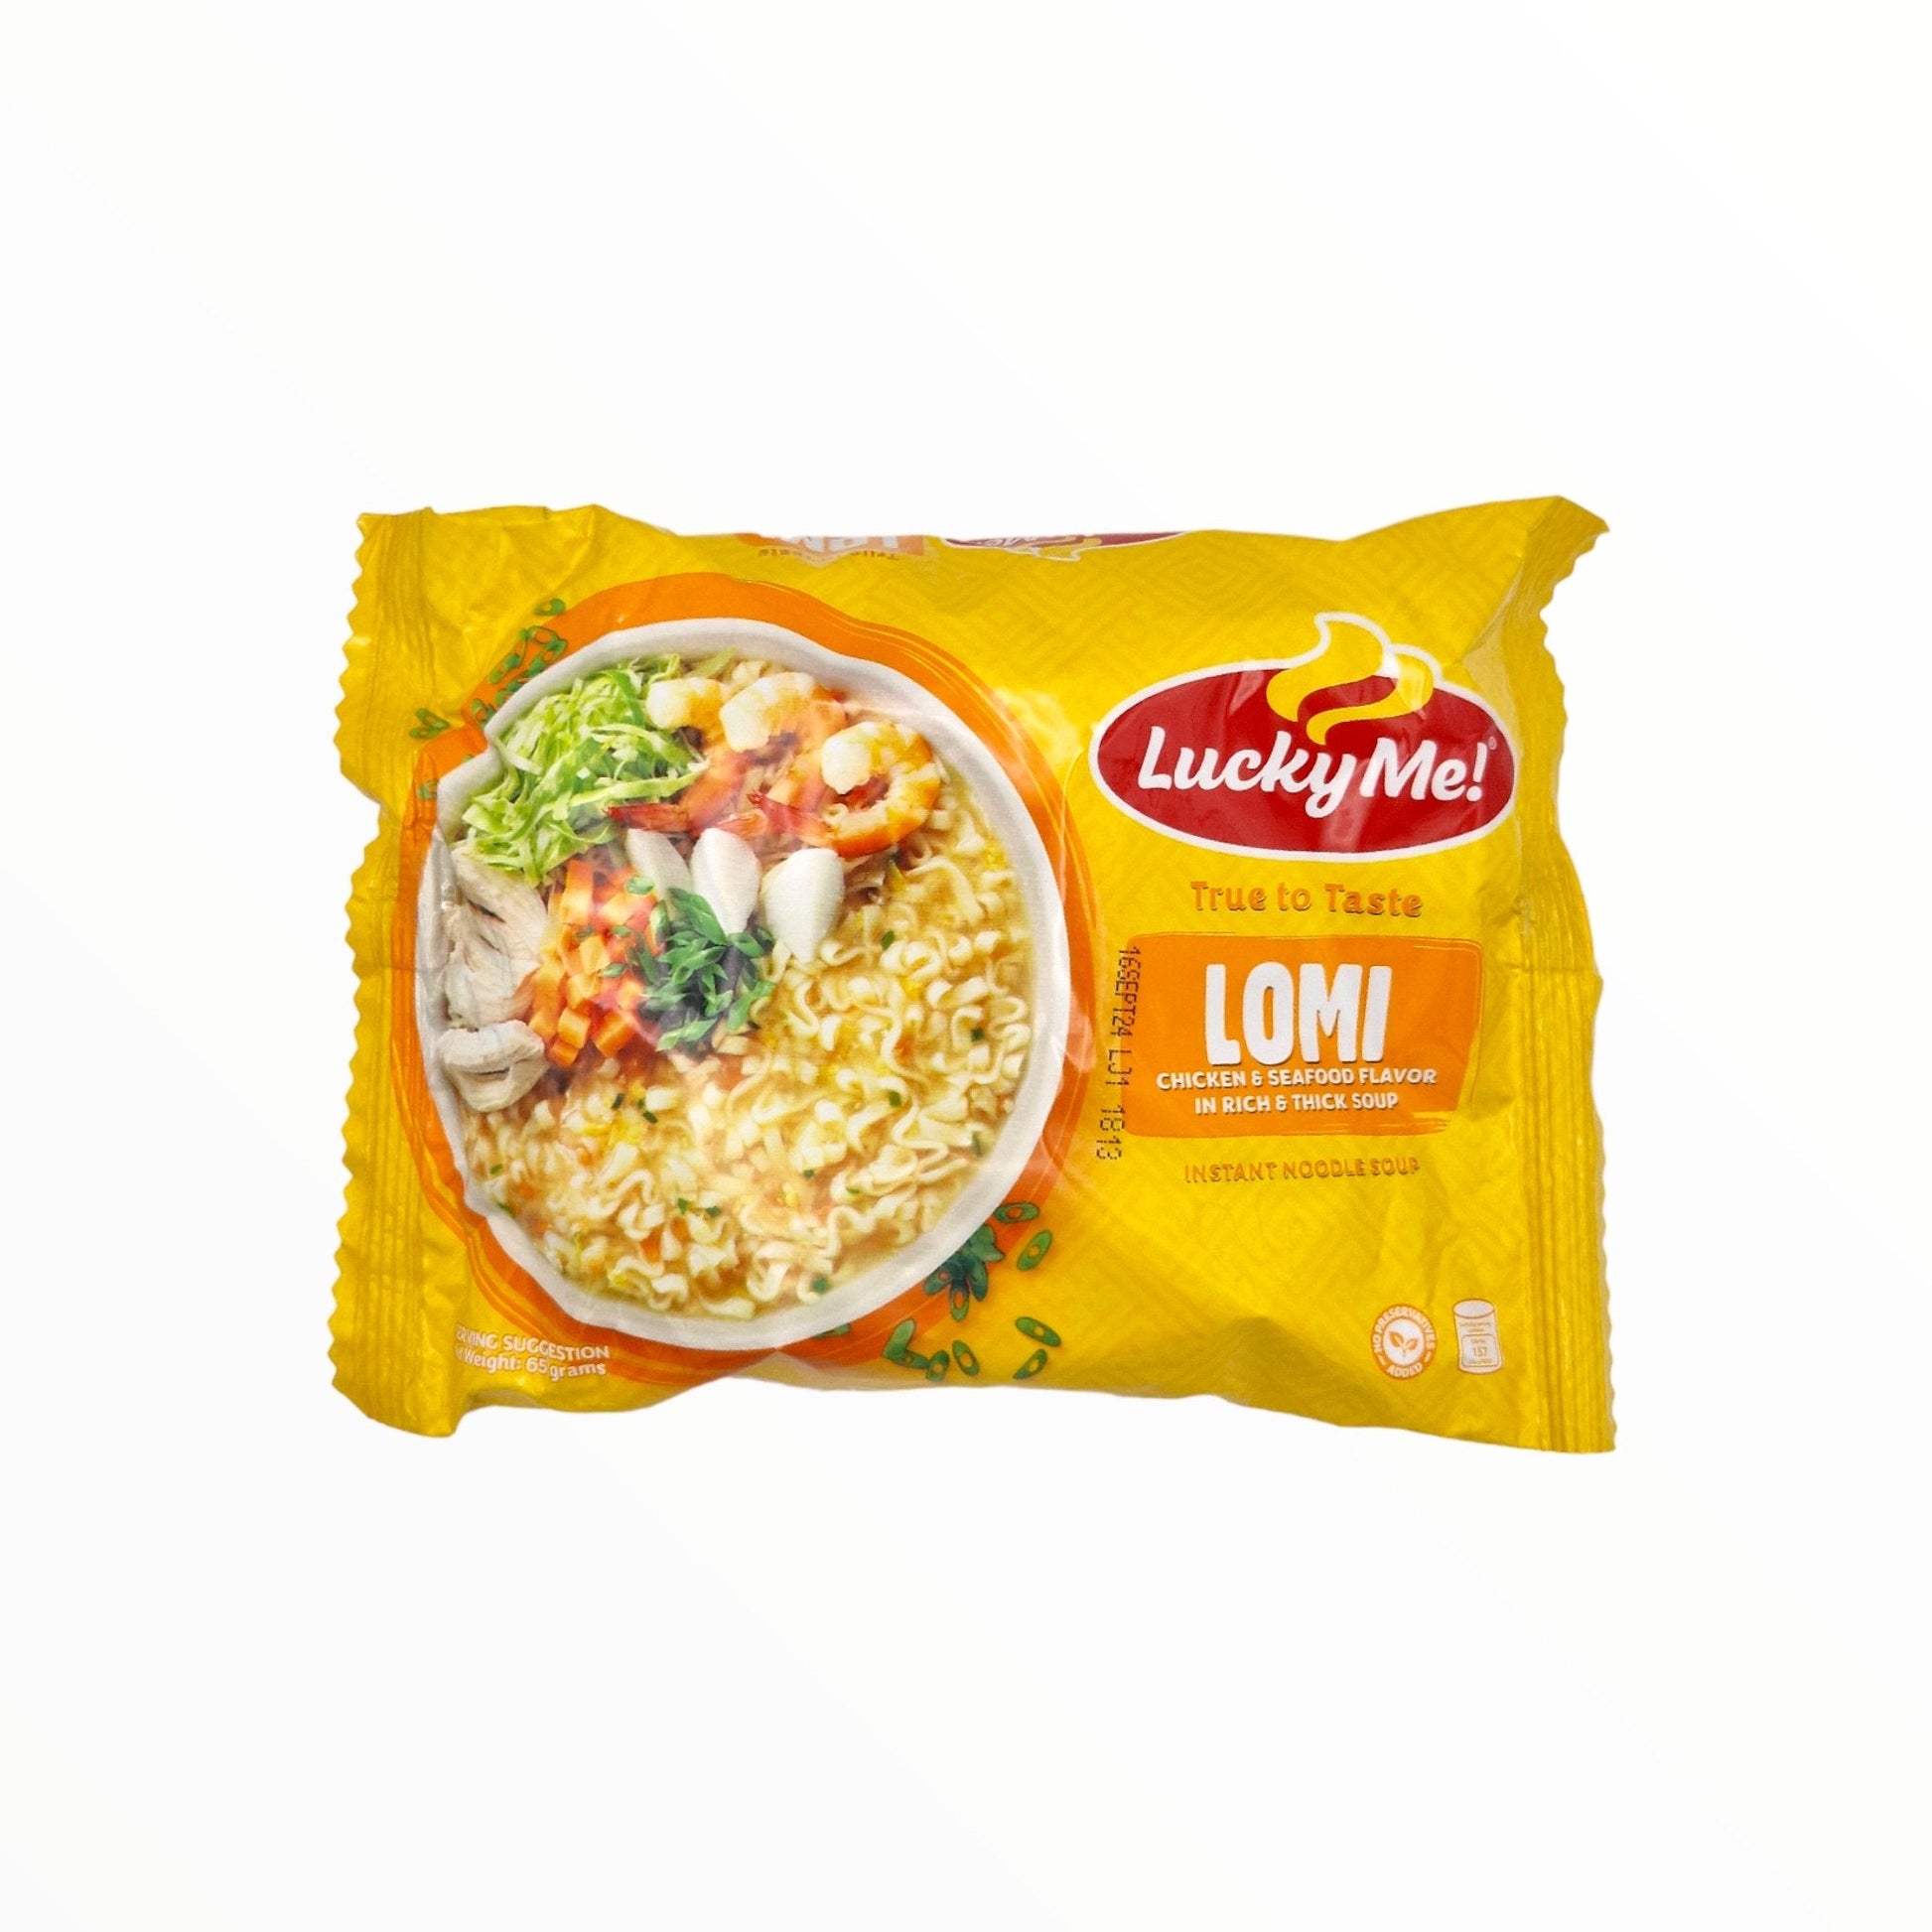 Instant Nudelsuppe Lomi 65g - Mabuhay Pinoy Asia Shop